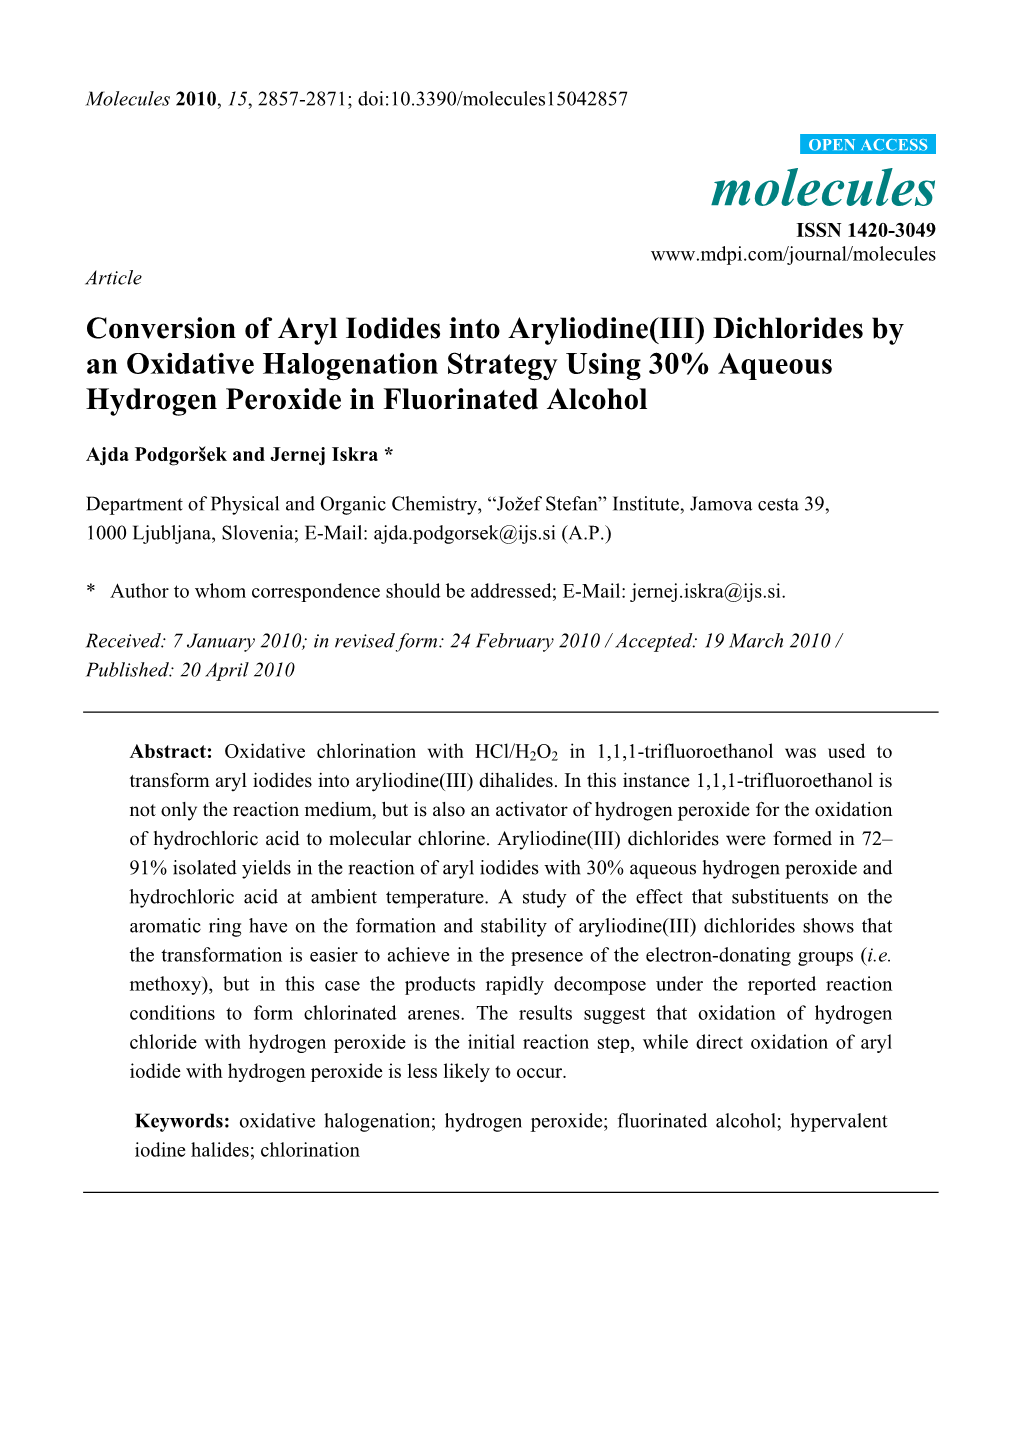 Conversion of Aryl Iodides Into Aryliodine (III) Dichlorides by An